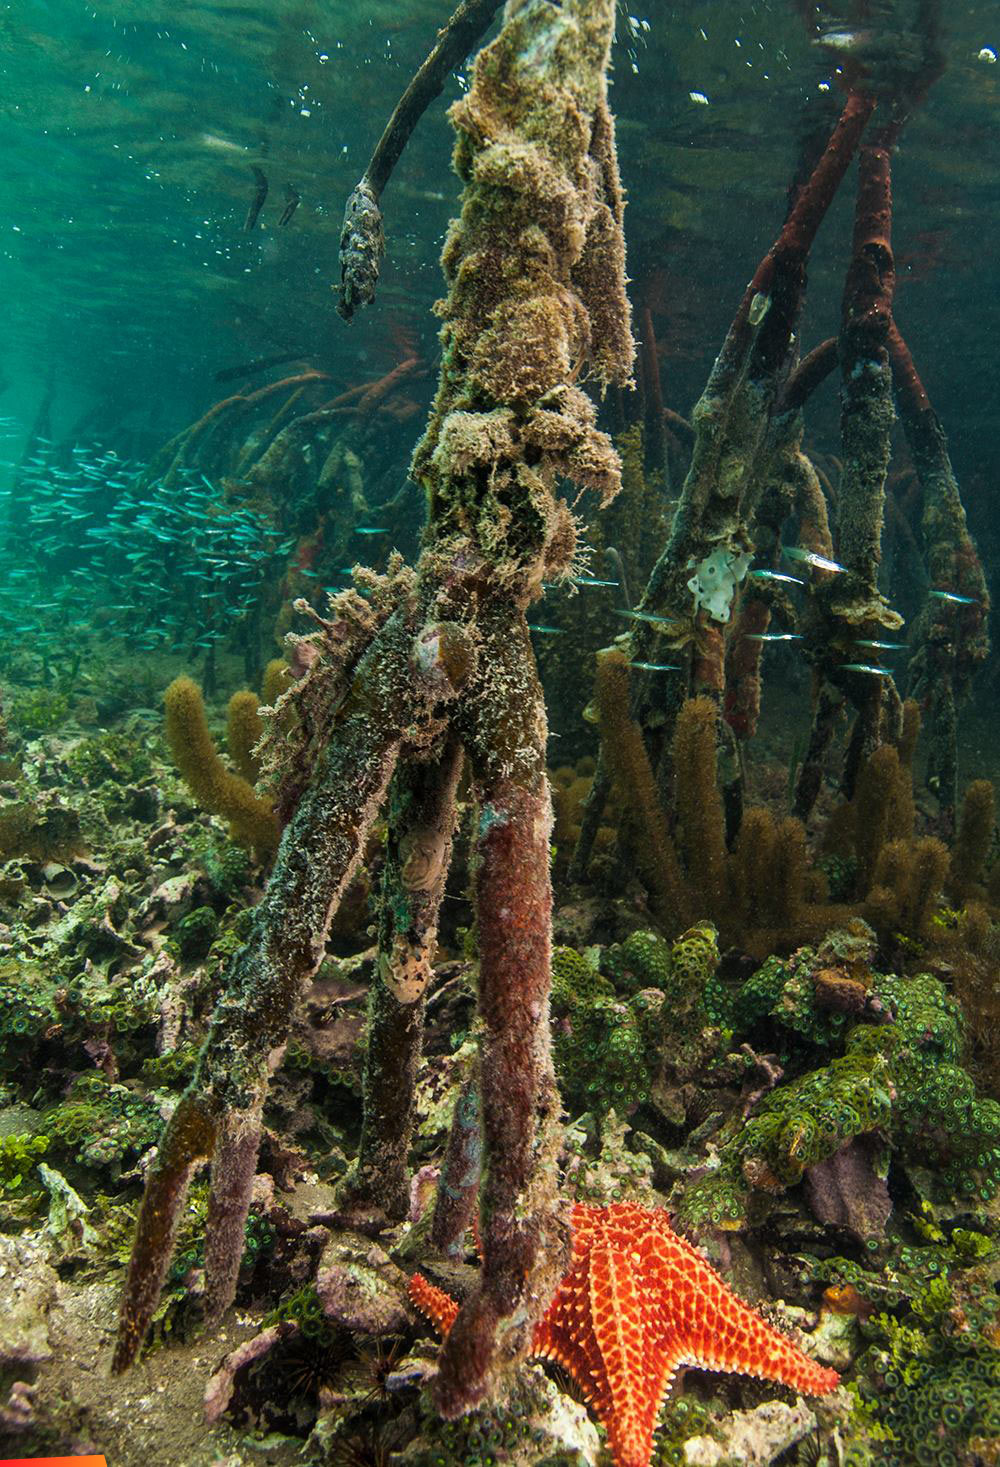 Mangrove roots under the sea, a special spot in the Pelican Range